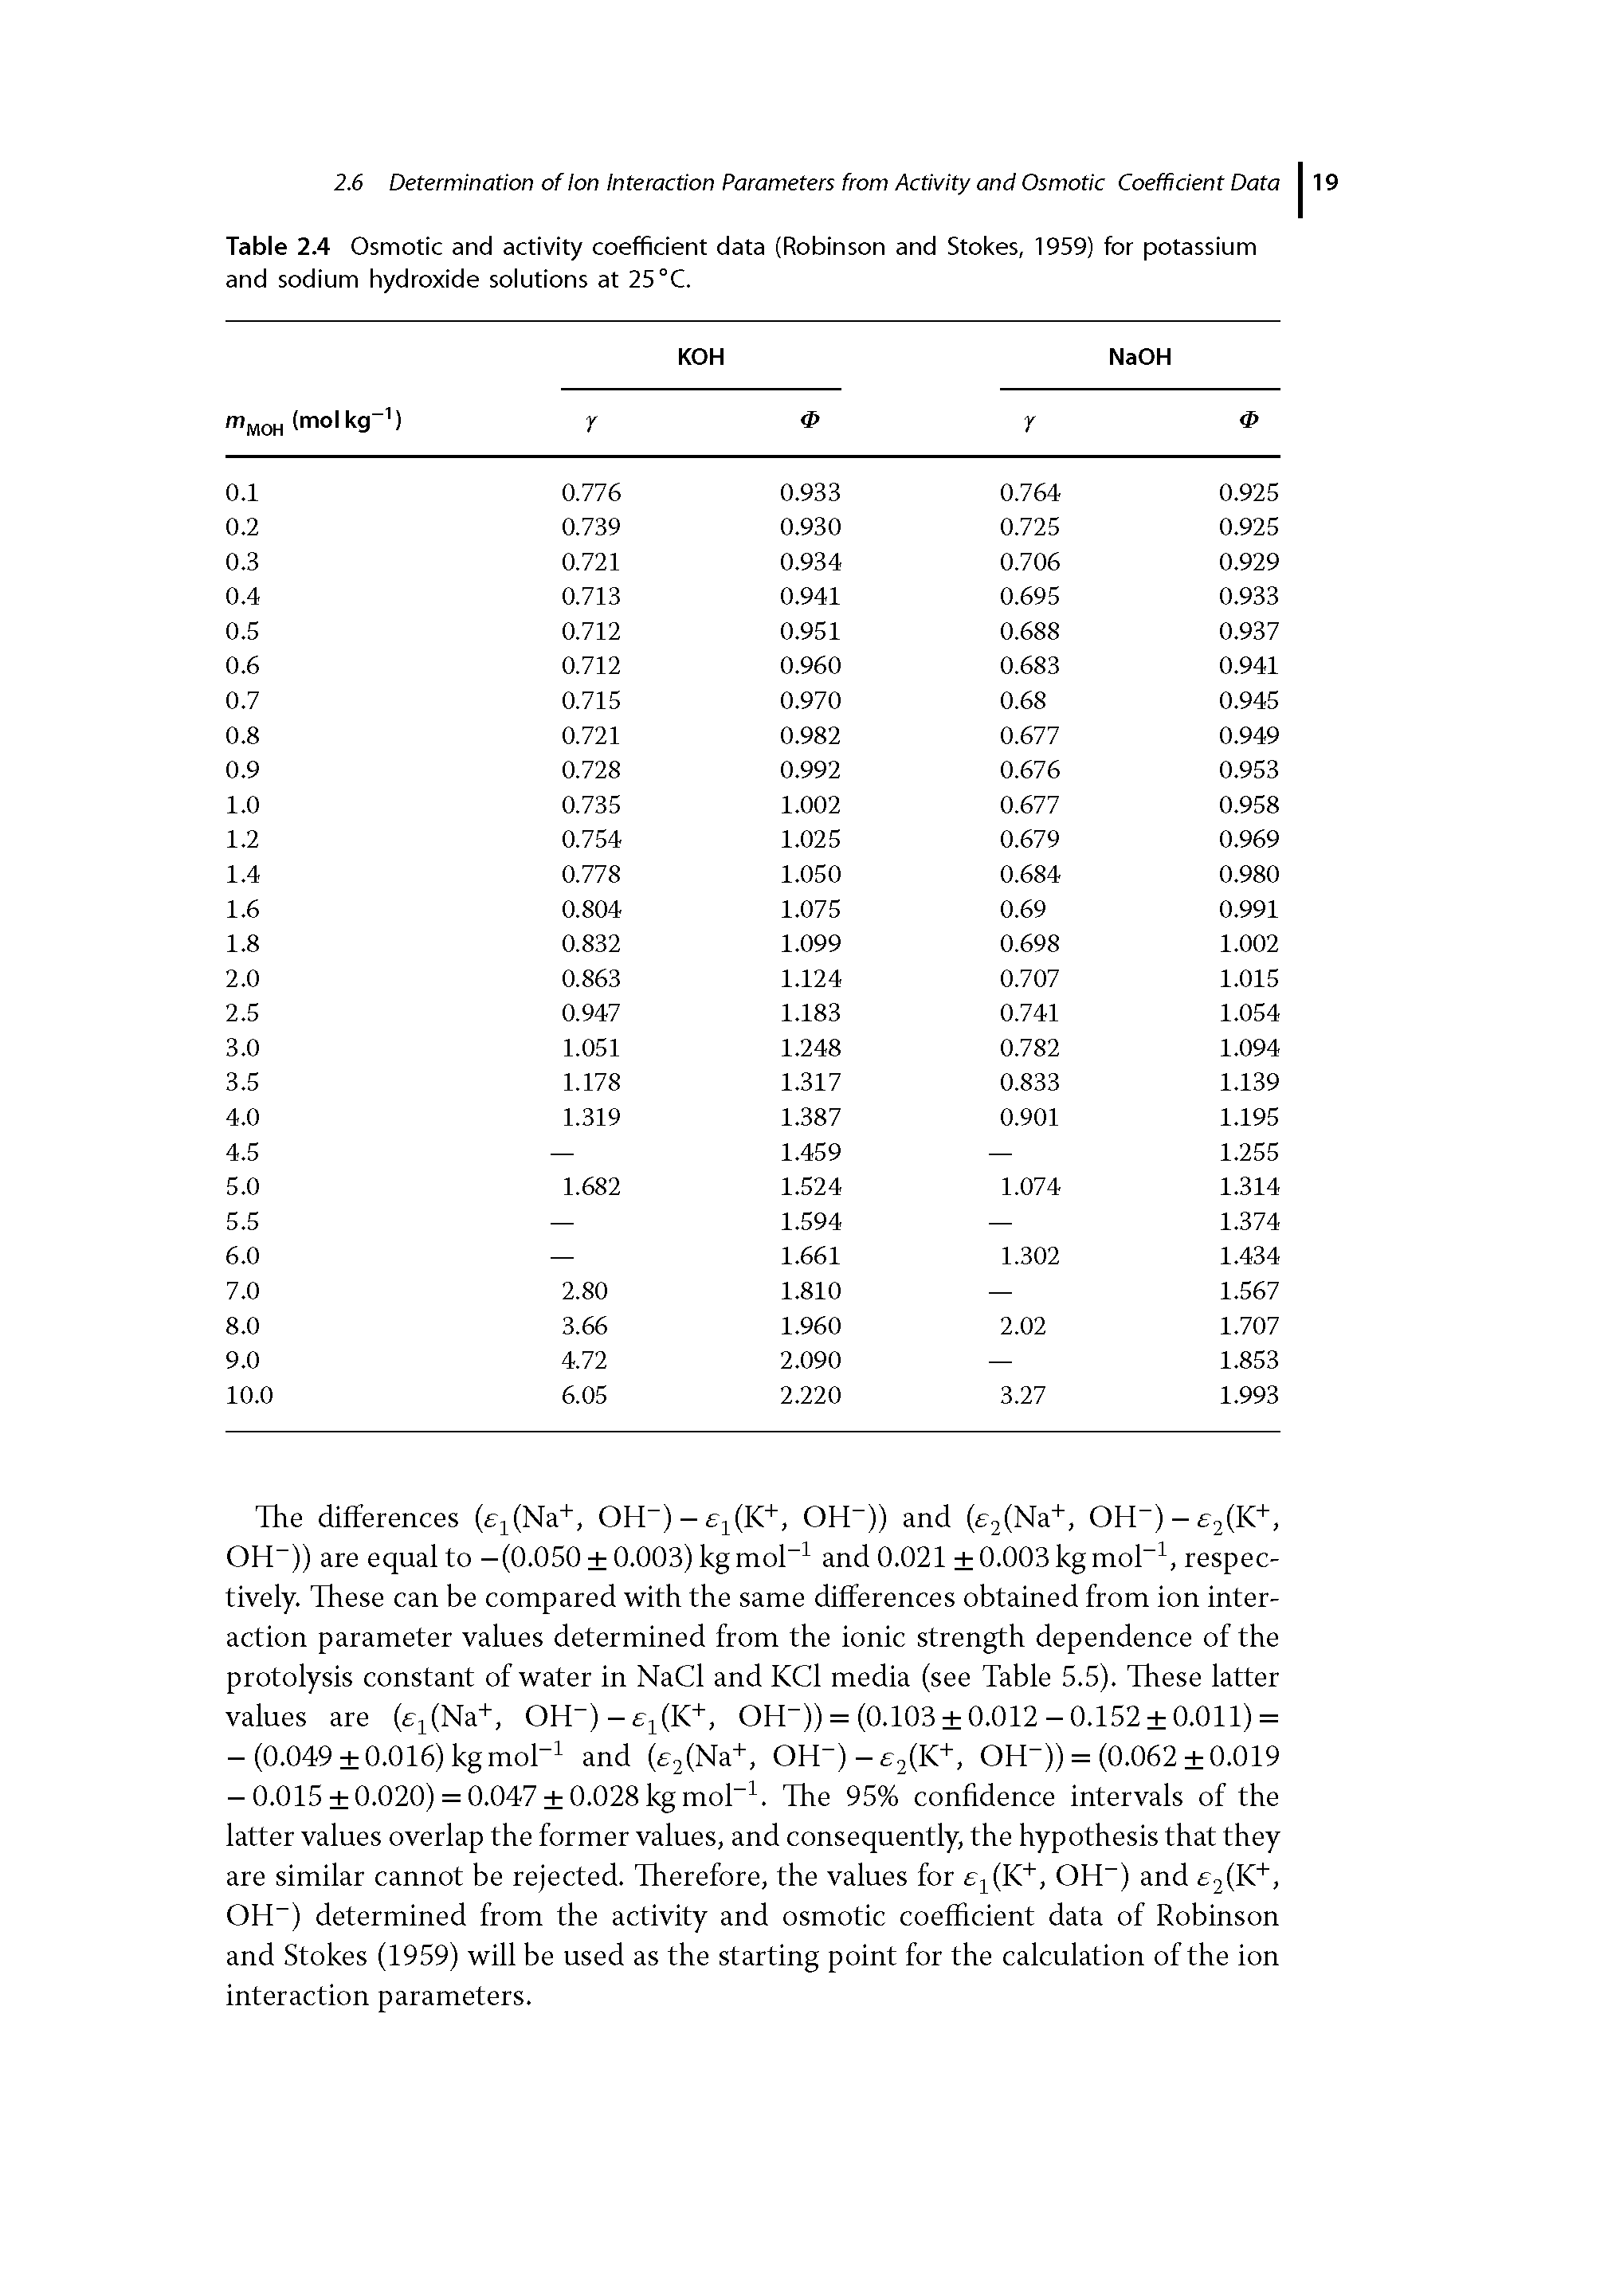 Table 2.4 Osmotic and activity coefficient data (Robinson and Stokes, 1959) for potassium and sodium hydroxide solutions at 25 °C.